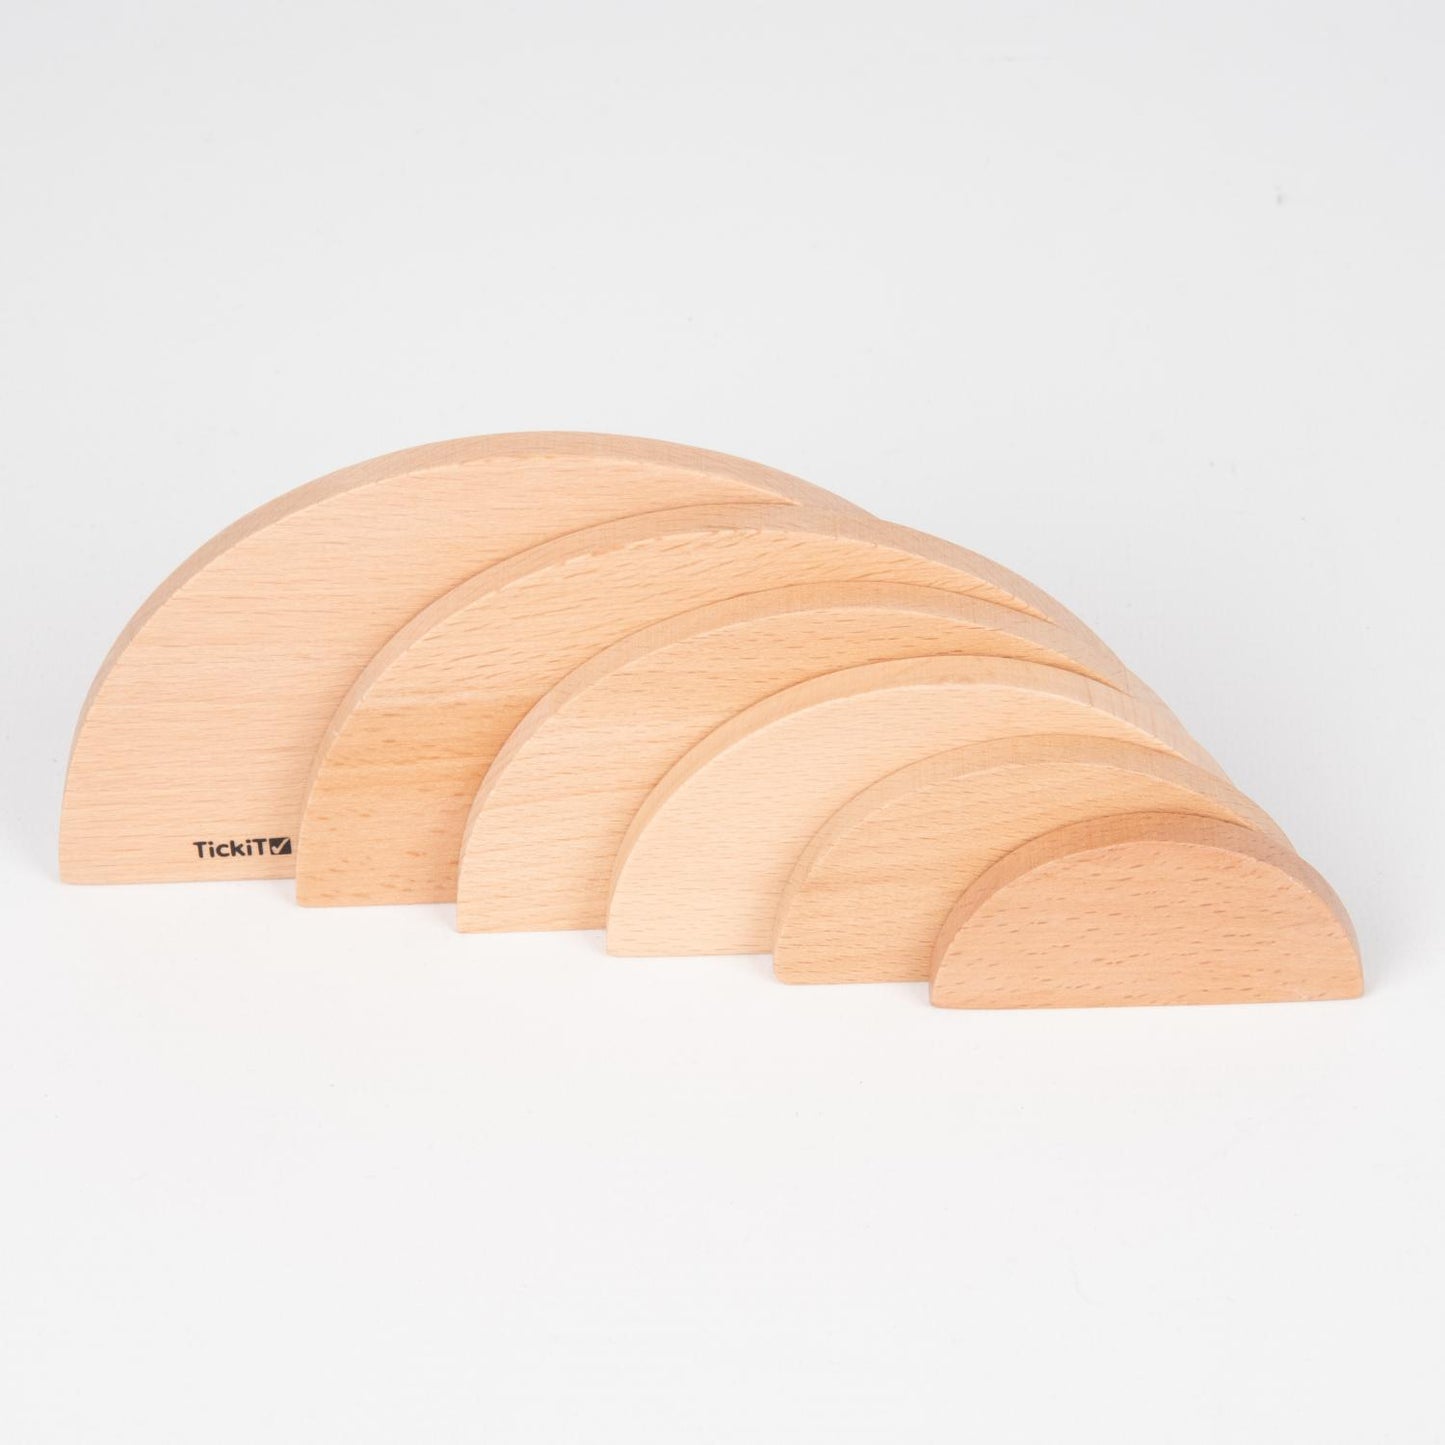 Natural Wooden Arch Panels | 6 Pieces | Wooden Activity Toy